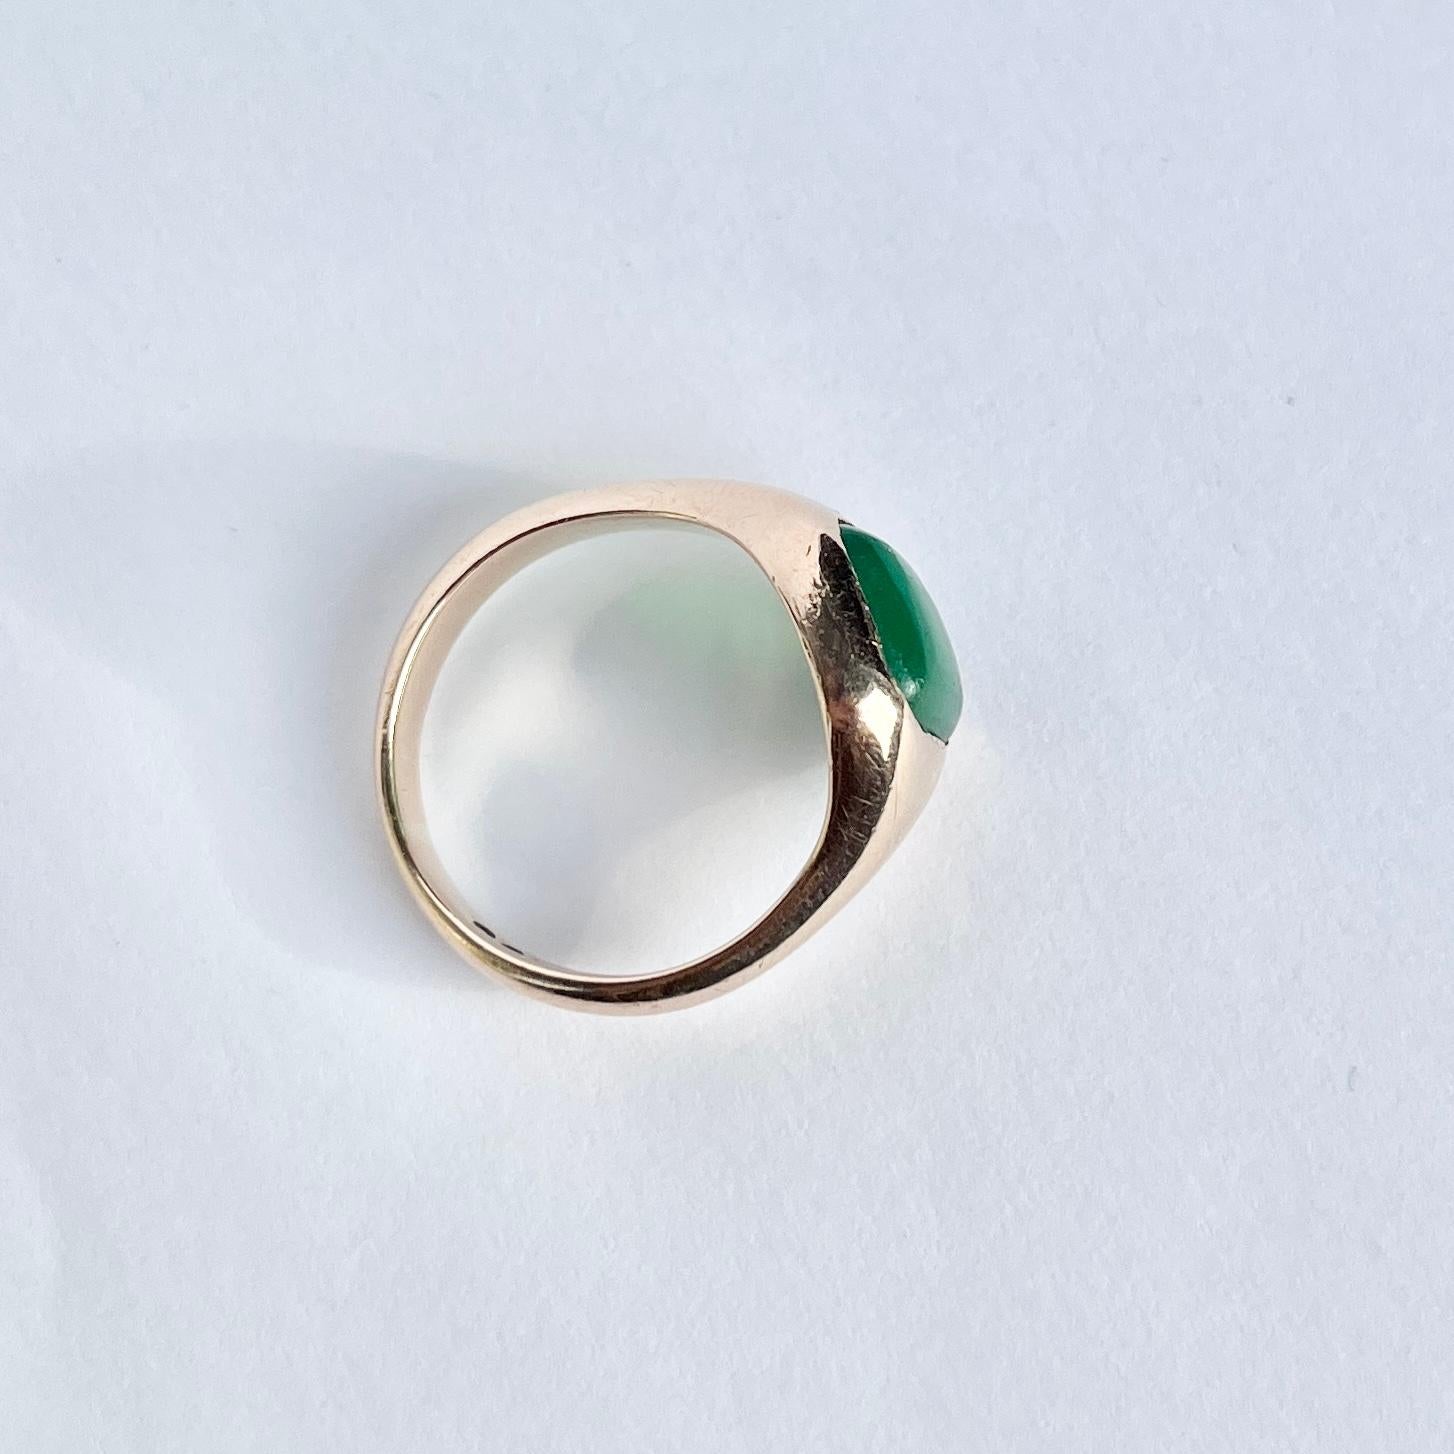 Antique Green Agate Charles Green & Sons 9 Carat Gold Signet Ring In Good Condition For Sale In Chipping Campden, GB